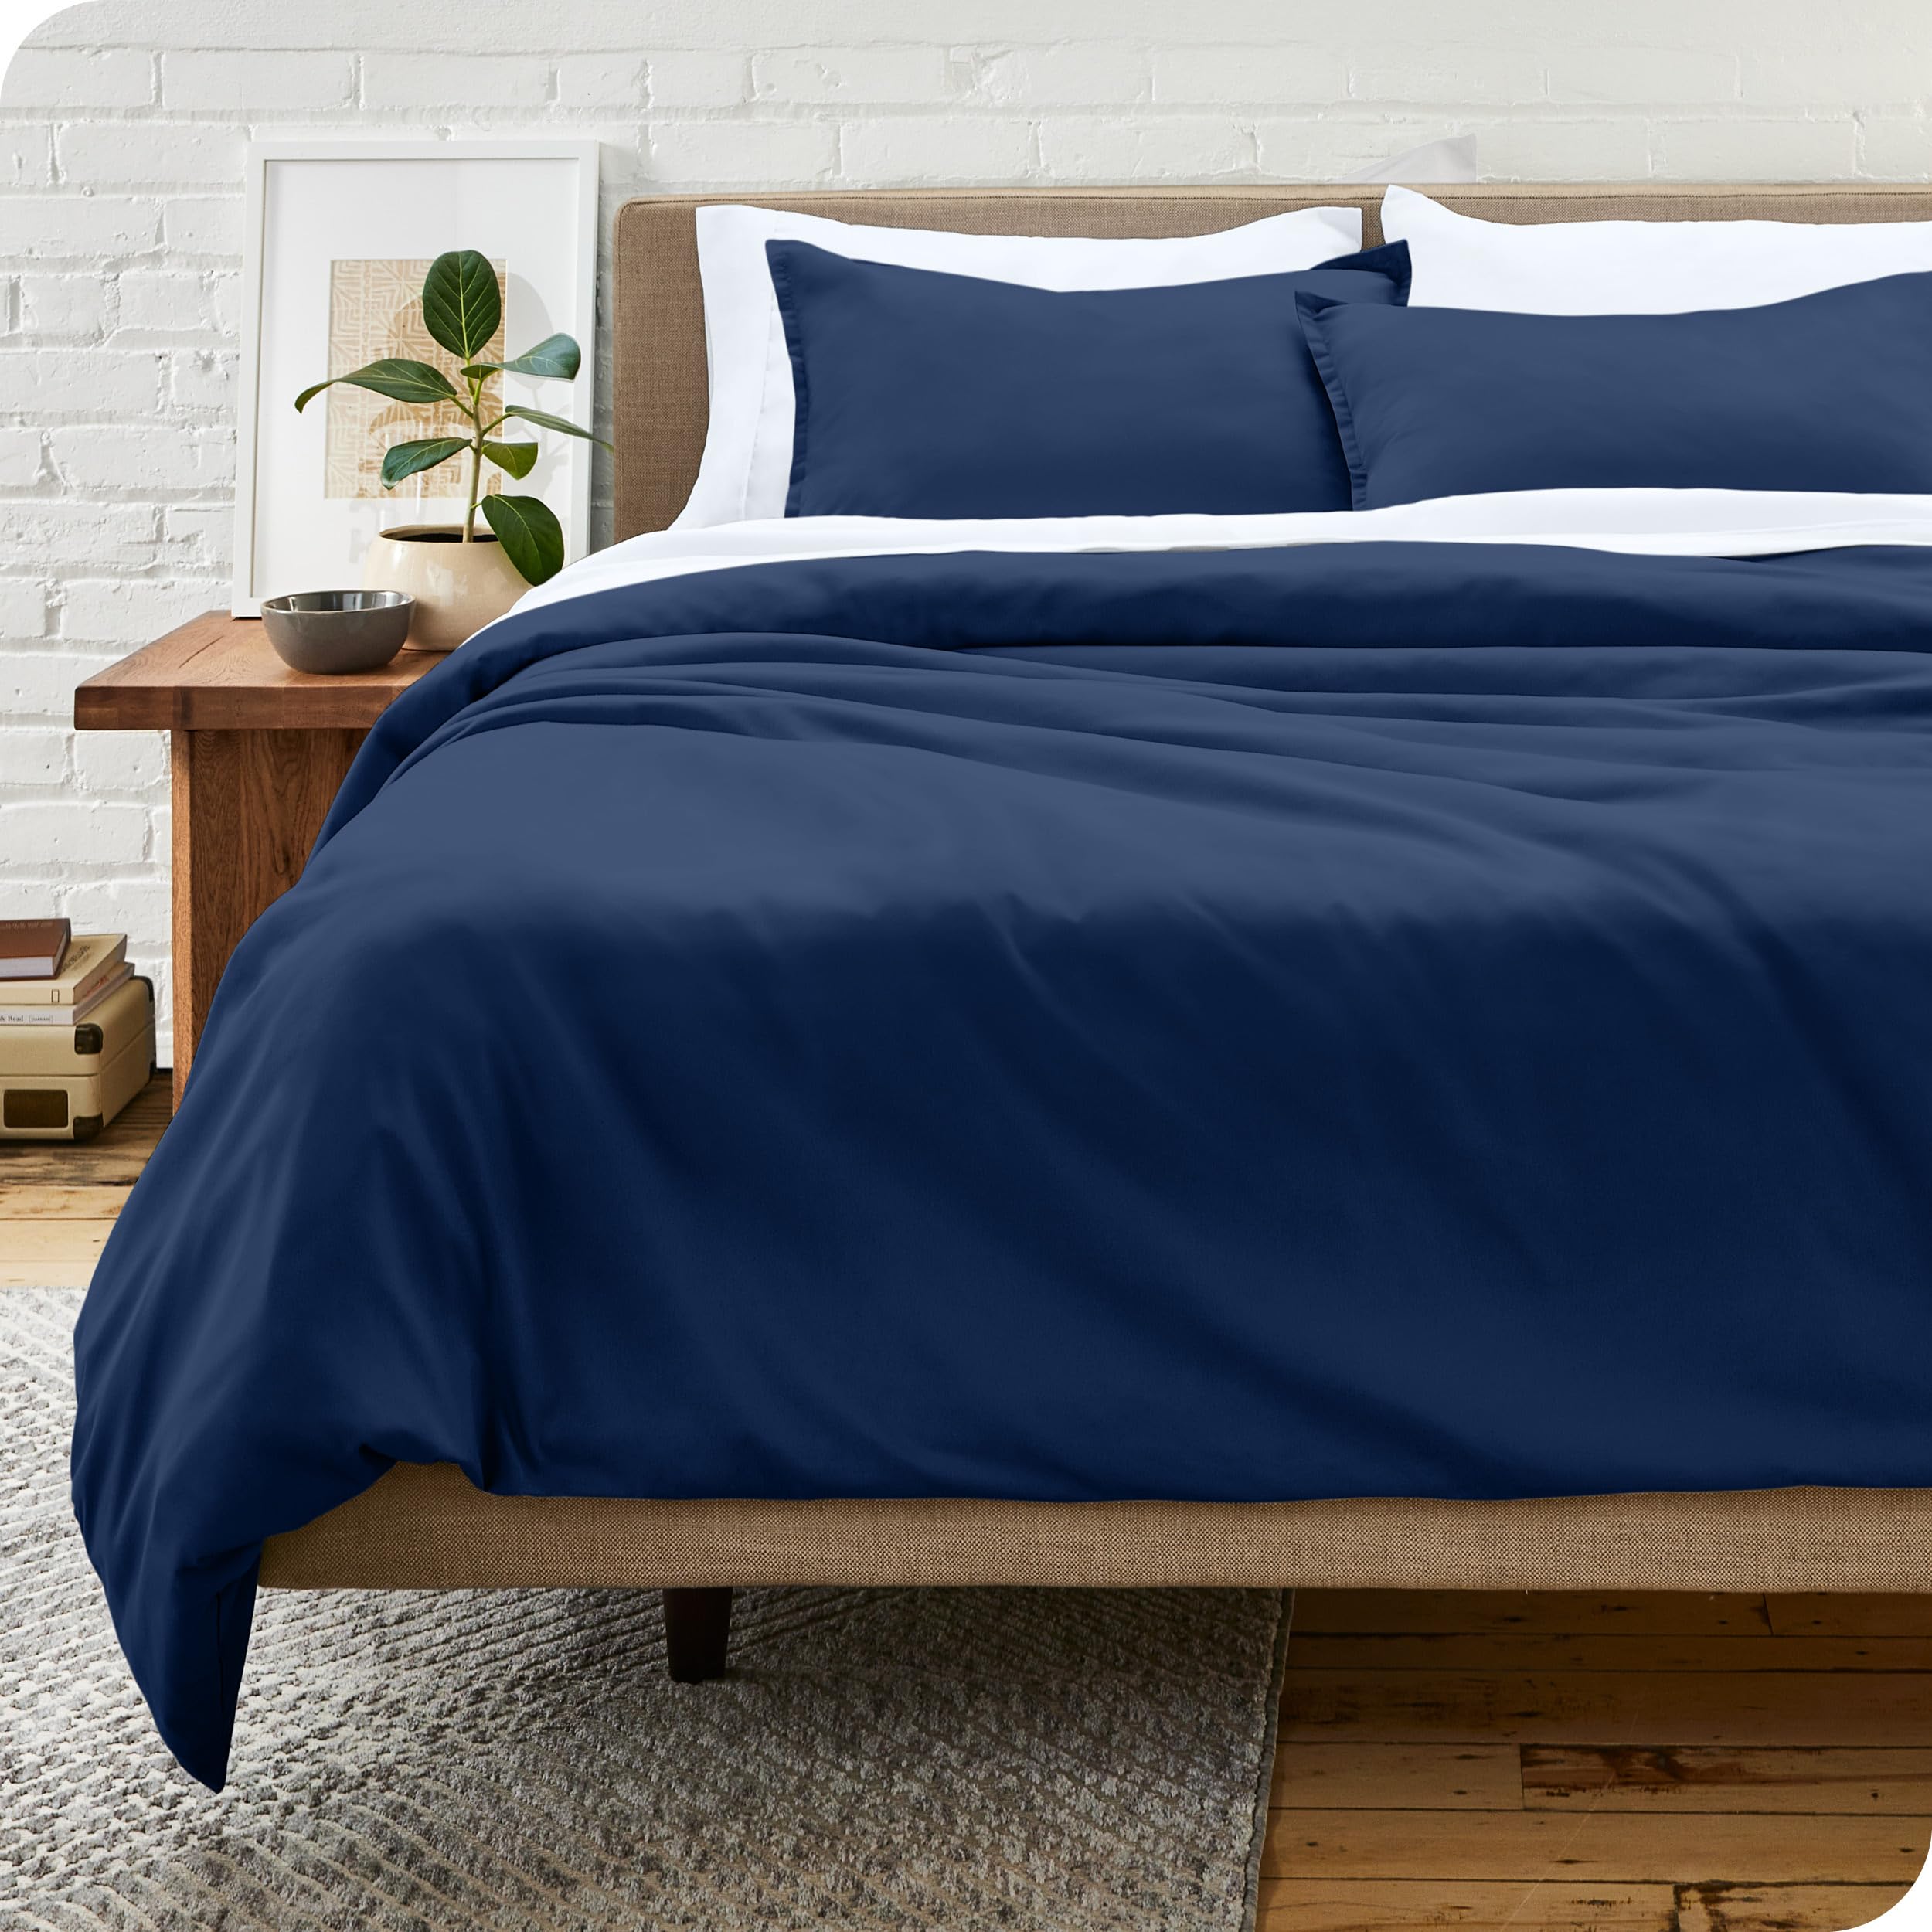 Book Cover Bare Home Duvet Cover and Sham Set - Twin/Twin Extra Long - Premium 1800 Ultra-Soft Brushed Microfiber - Hypoallergenic, Easy Care, Wrinkle Resistant (Twin/Twin XL, Dark Blue)